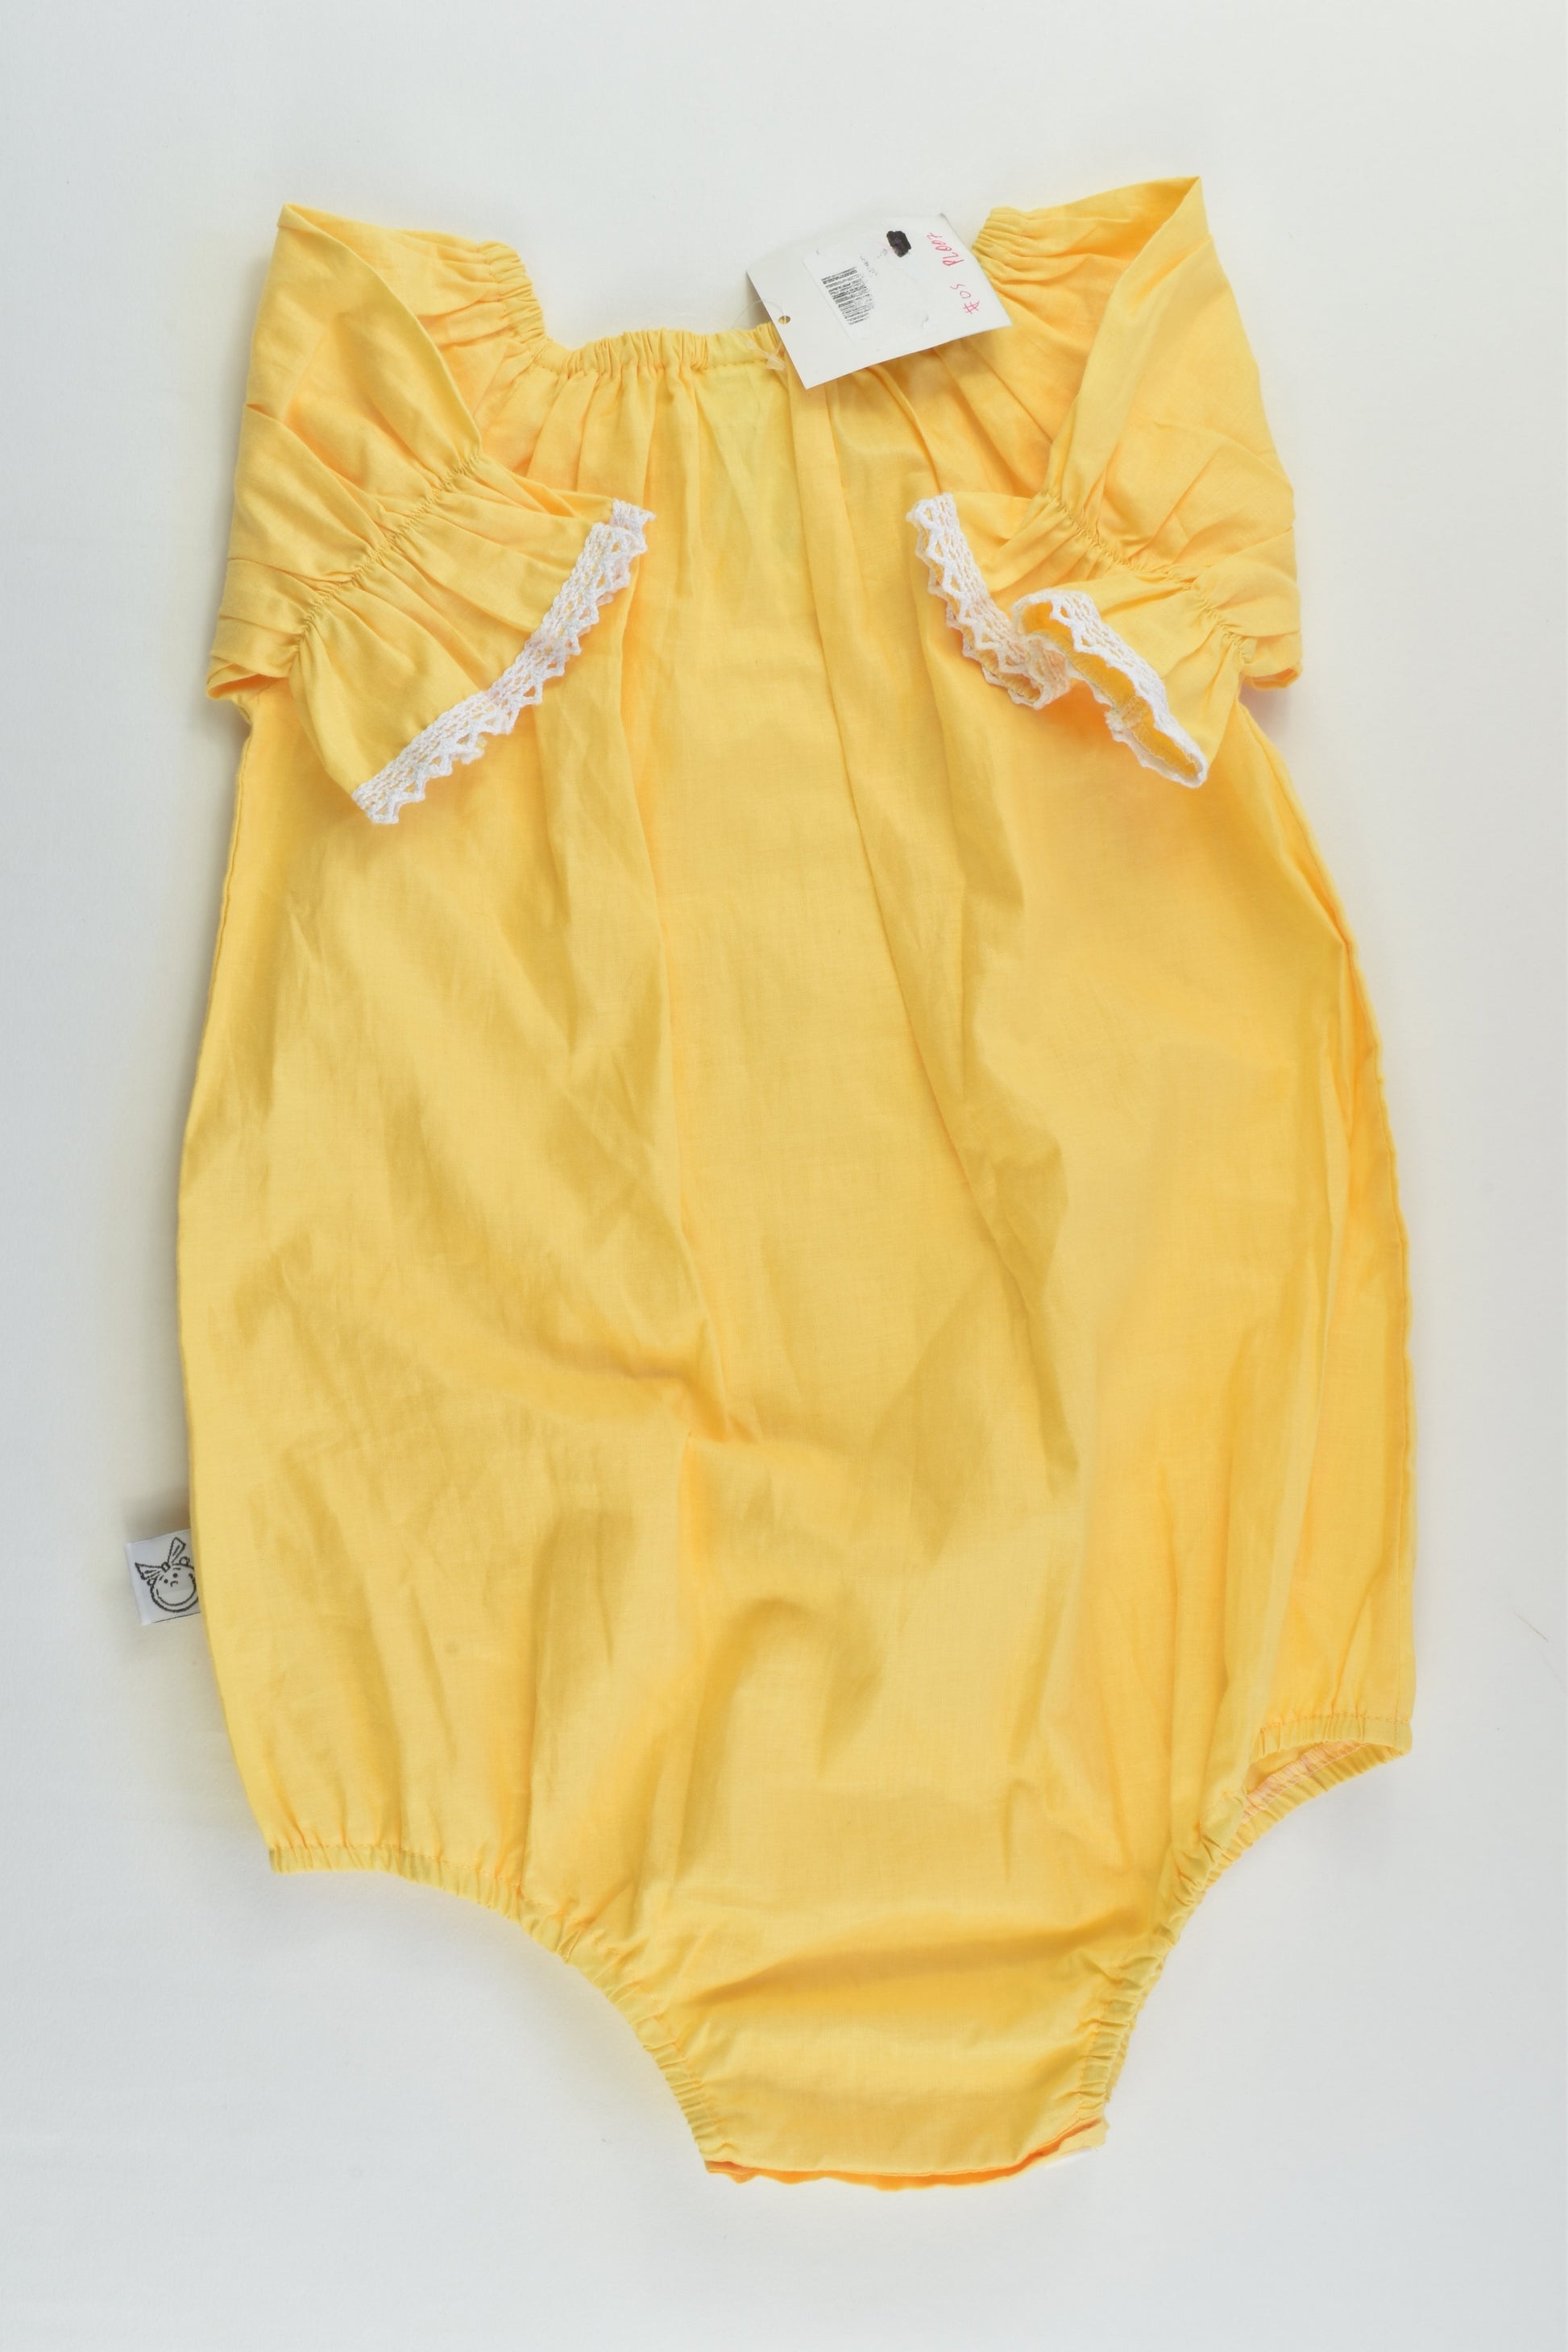 NEW Pour Bebe by Couturekidz Size 2 Summer Romper with Lace Details